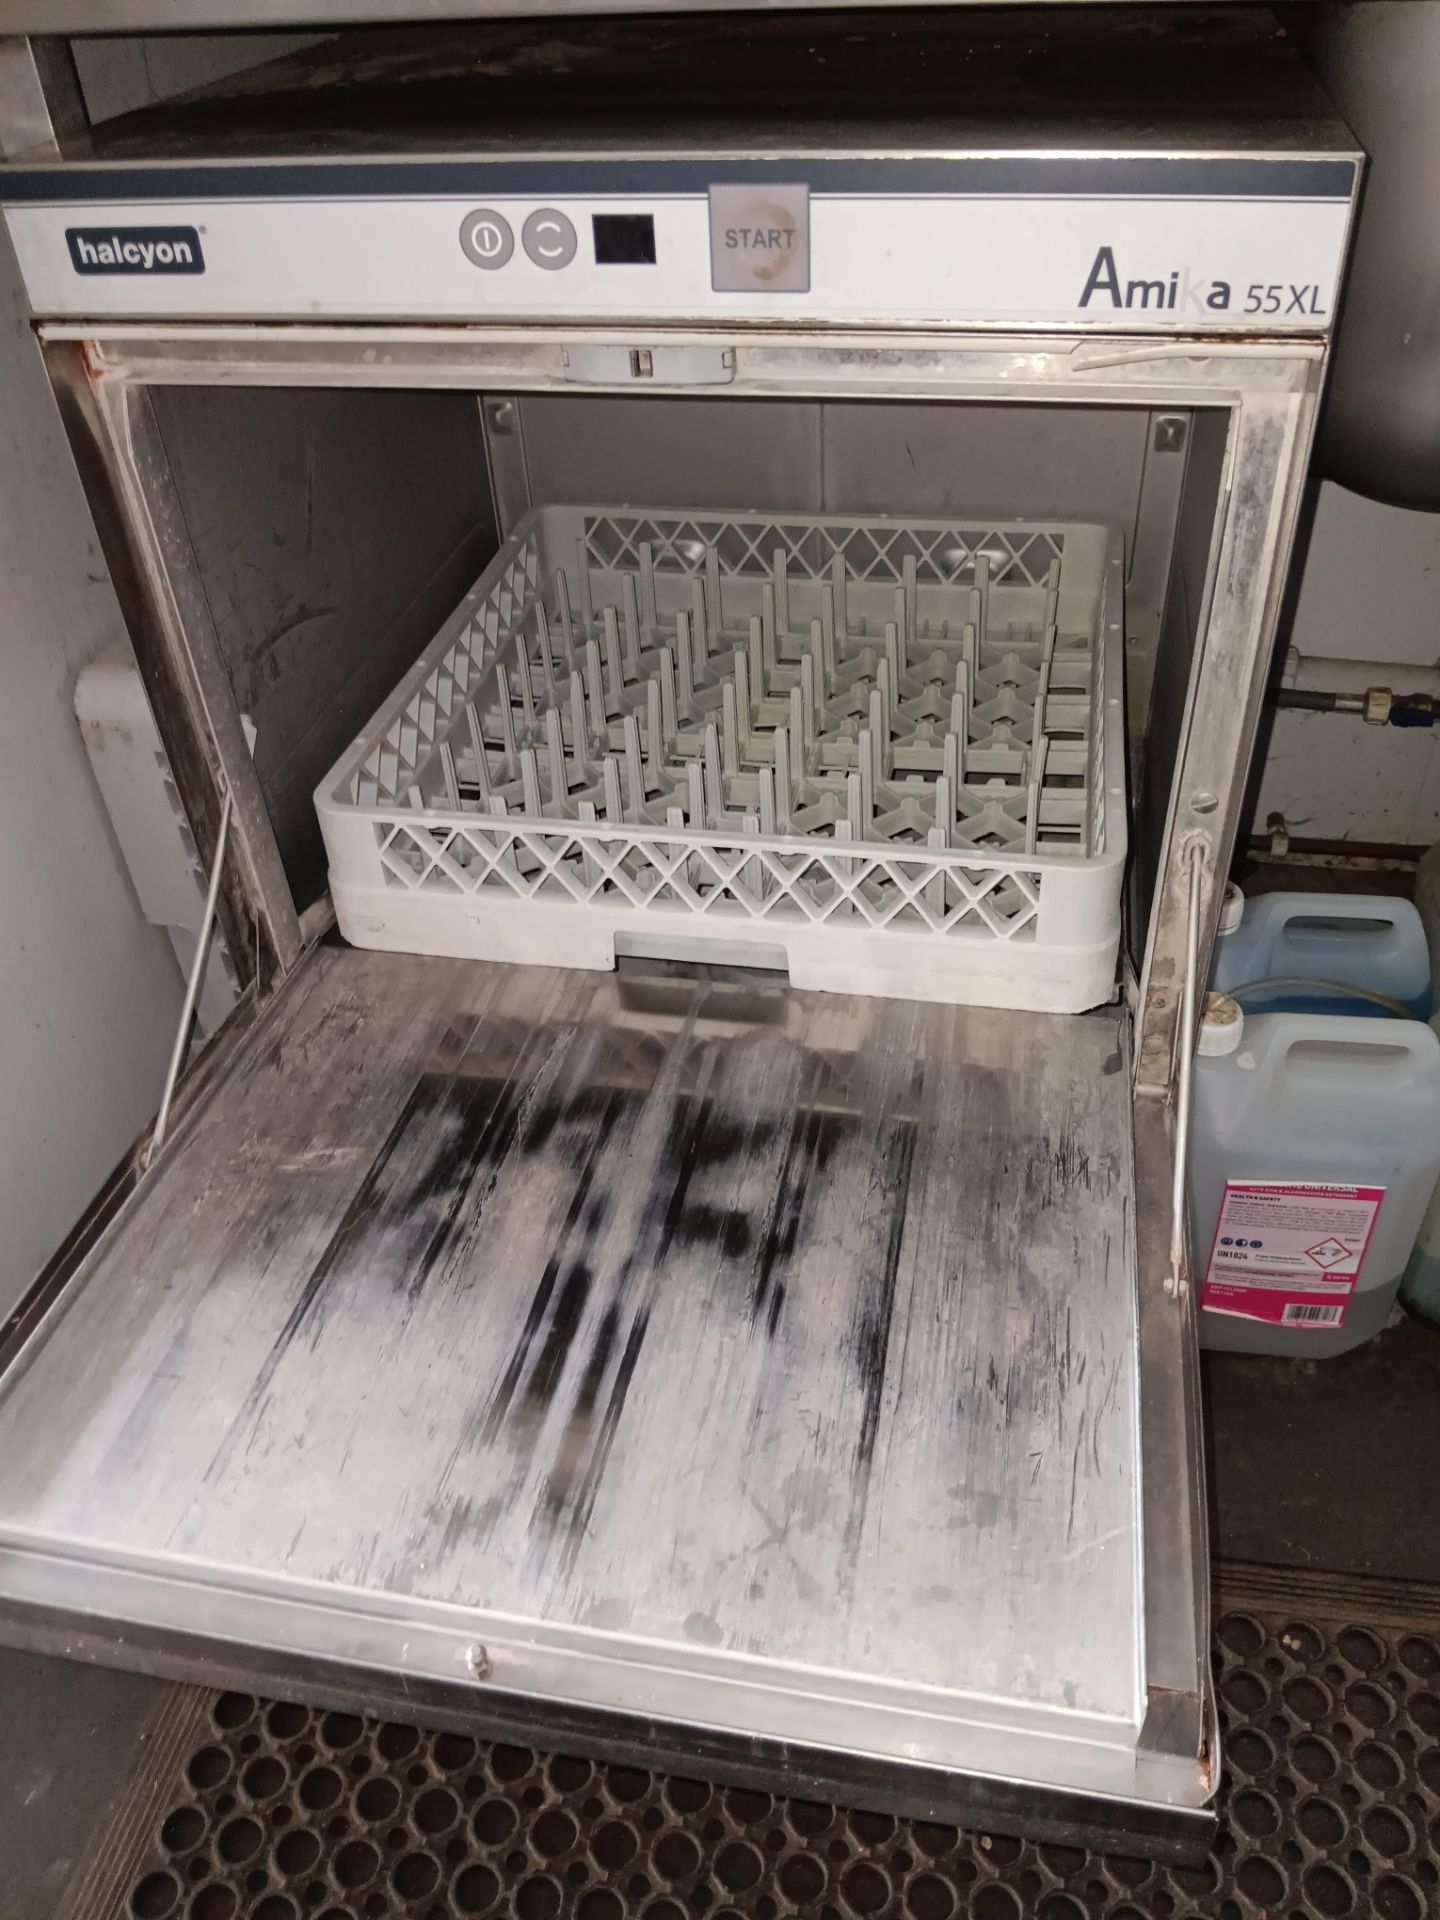 Halcyon Amika 55xL stainless steel glasswasher (disconnection required by qualified tradesperson) - Image 2 of 3